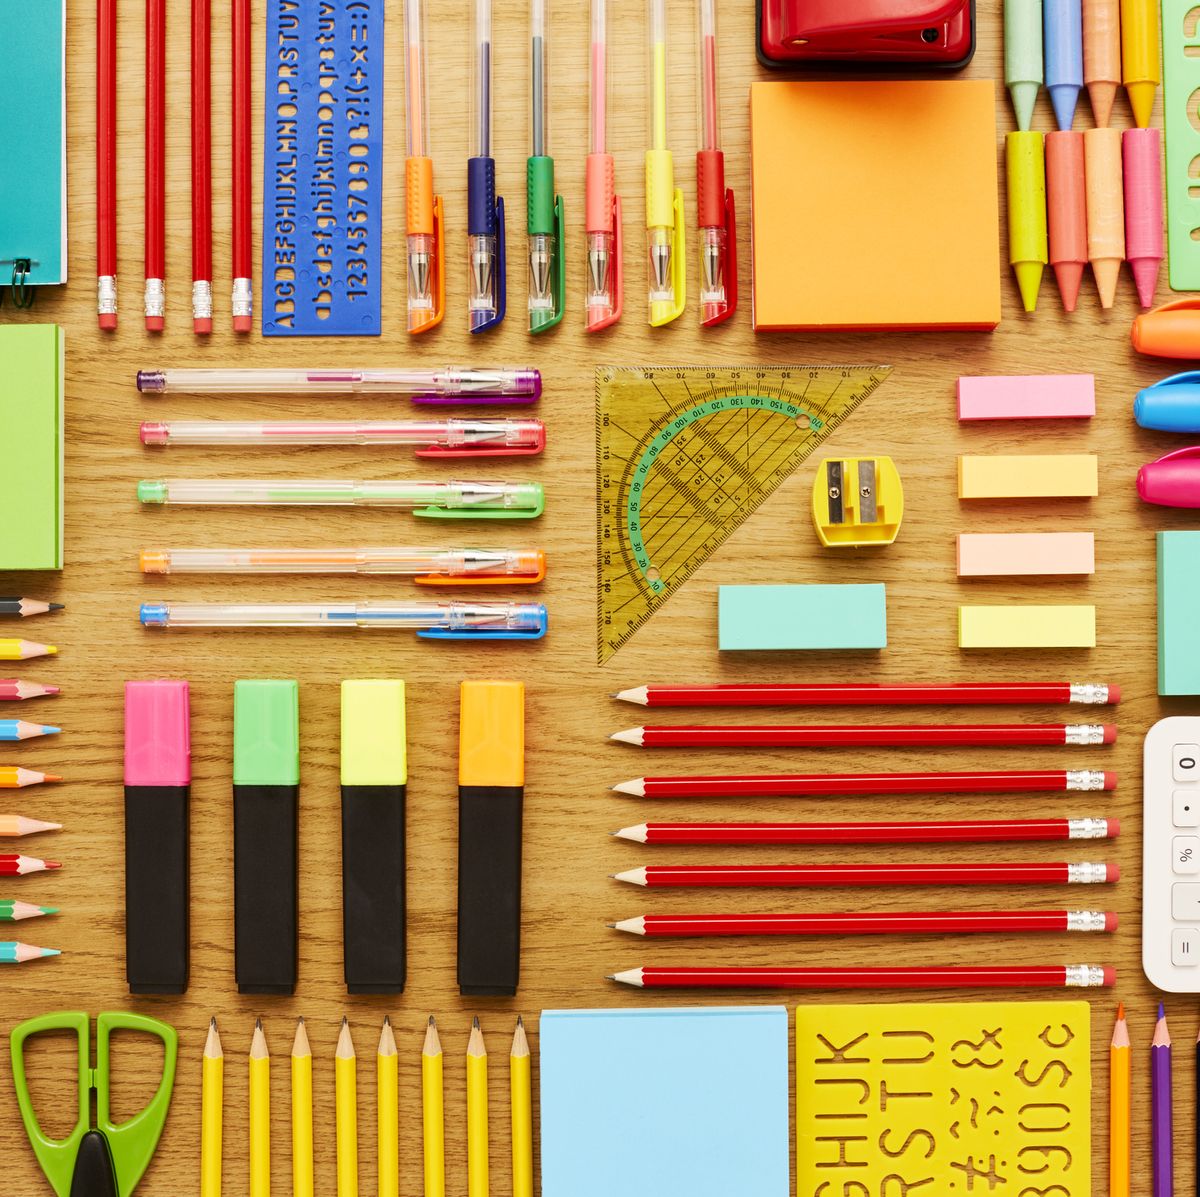 Where to Buy Office Supplies Online? 10 Best Stores in the USA